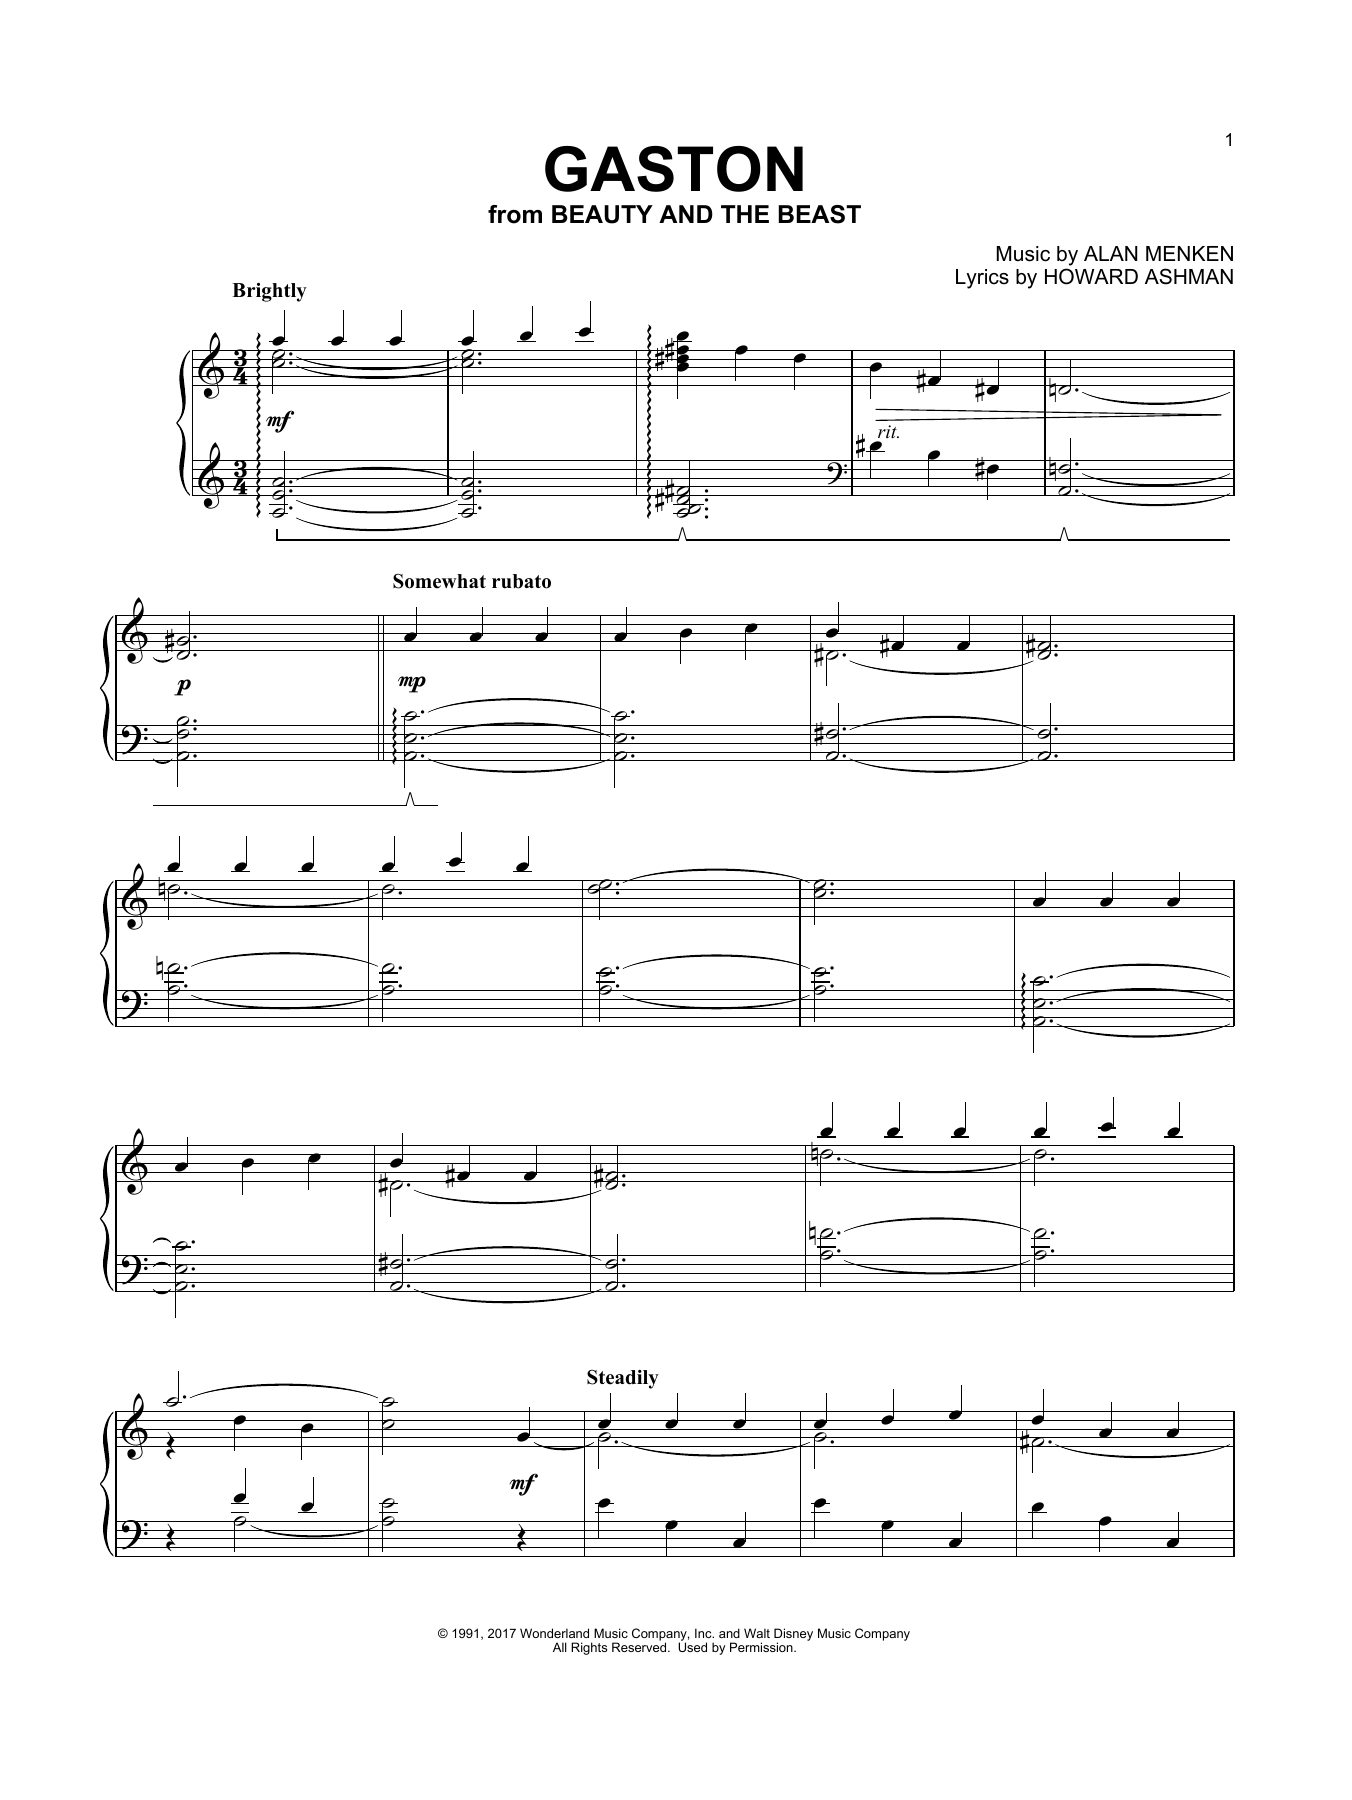 Download Beauty and the Beast Cast Gaston (from Beauty And The Beast) Sheet Music